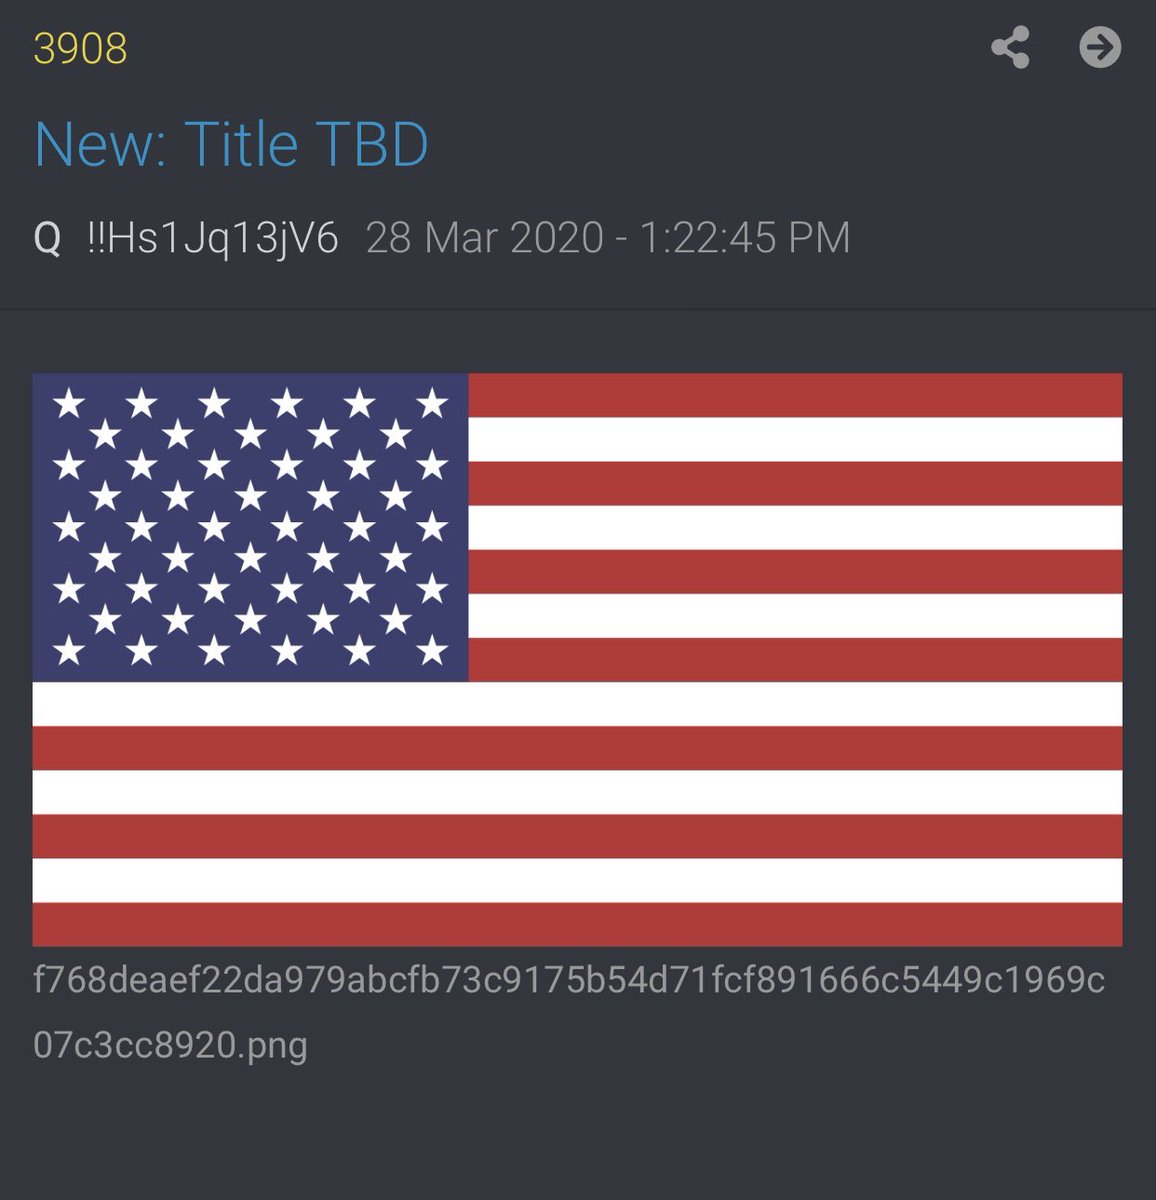 Anon mentions repeatedly seeing 88. Check on Gematria value leads to stringer from a Q flag post. Locks another connection to VK image 87:25:05, also flag post when searching map for time stamp: 7:25:05. The left over 8 links to Trump tweet and ROT8.  https://twitter.com/justanarcher/status/1283445167241011201?s=21  https://twitter.com/justanarcher/status/1283445167241011201